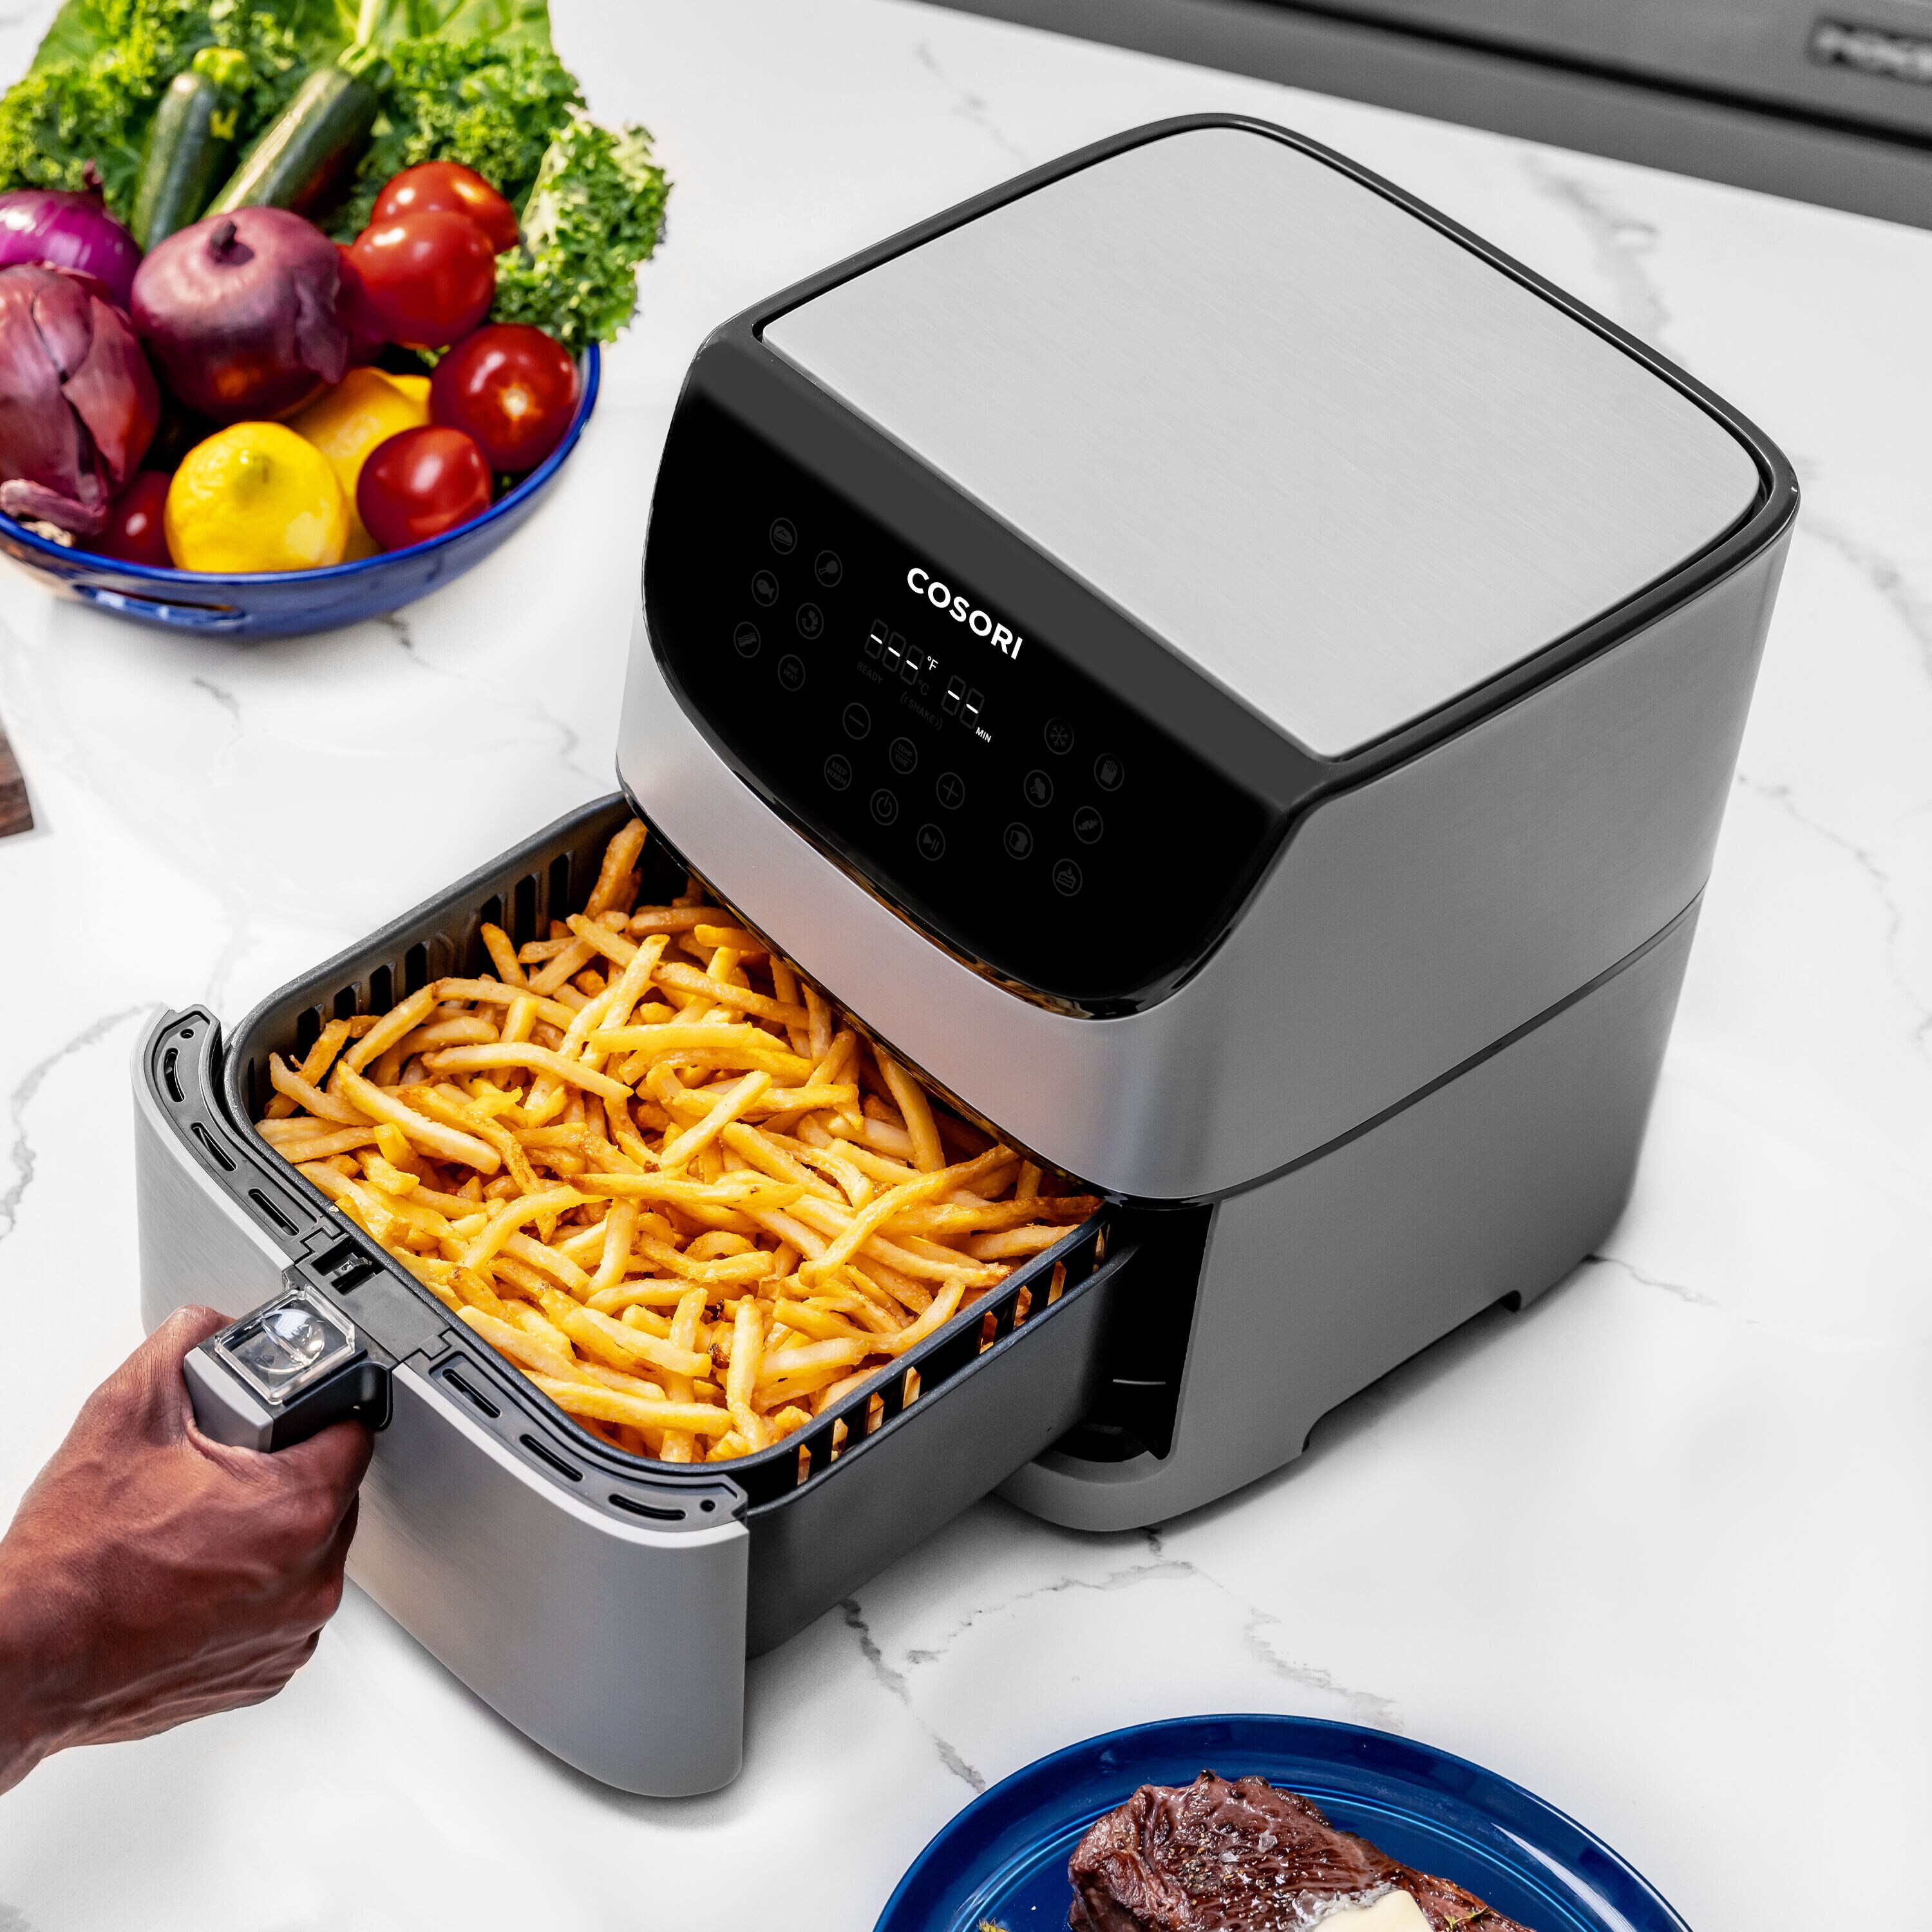  COSORI 5.8QT Air Fryer Black with Extra Frying Basket